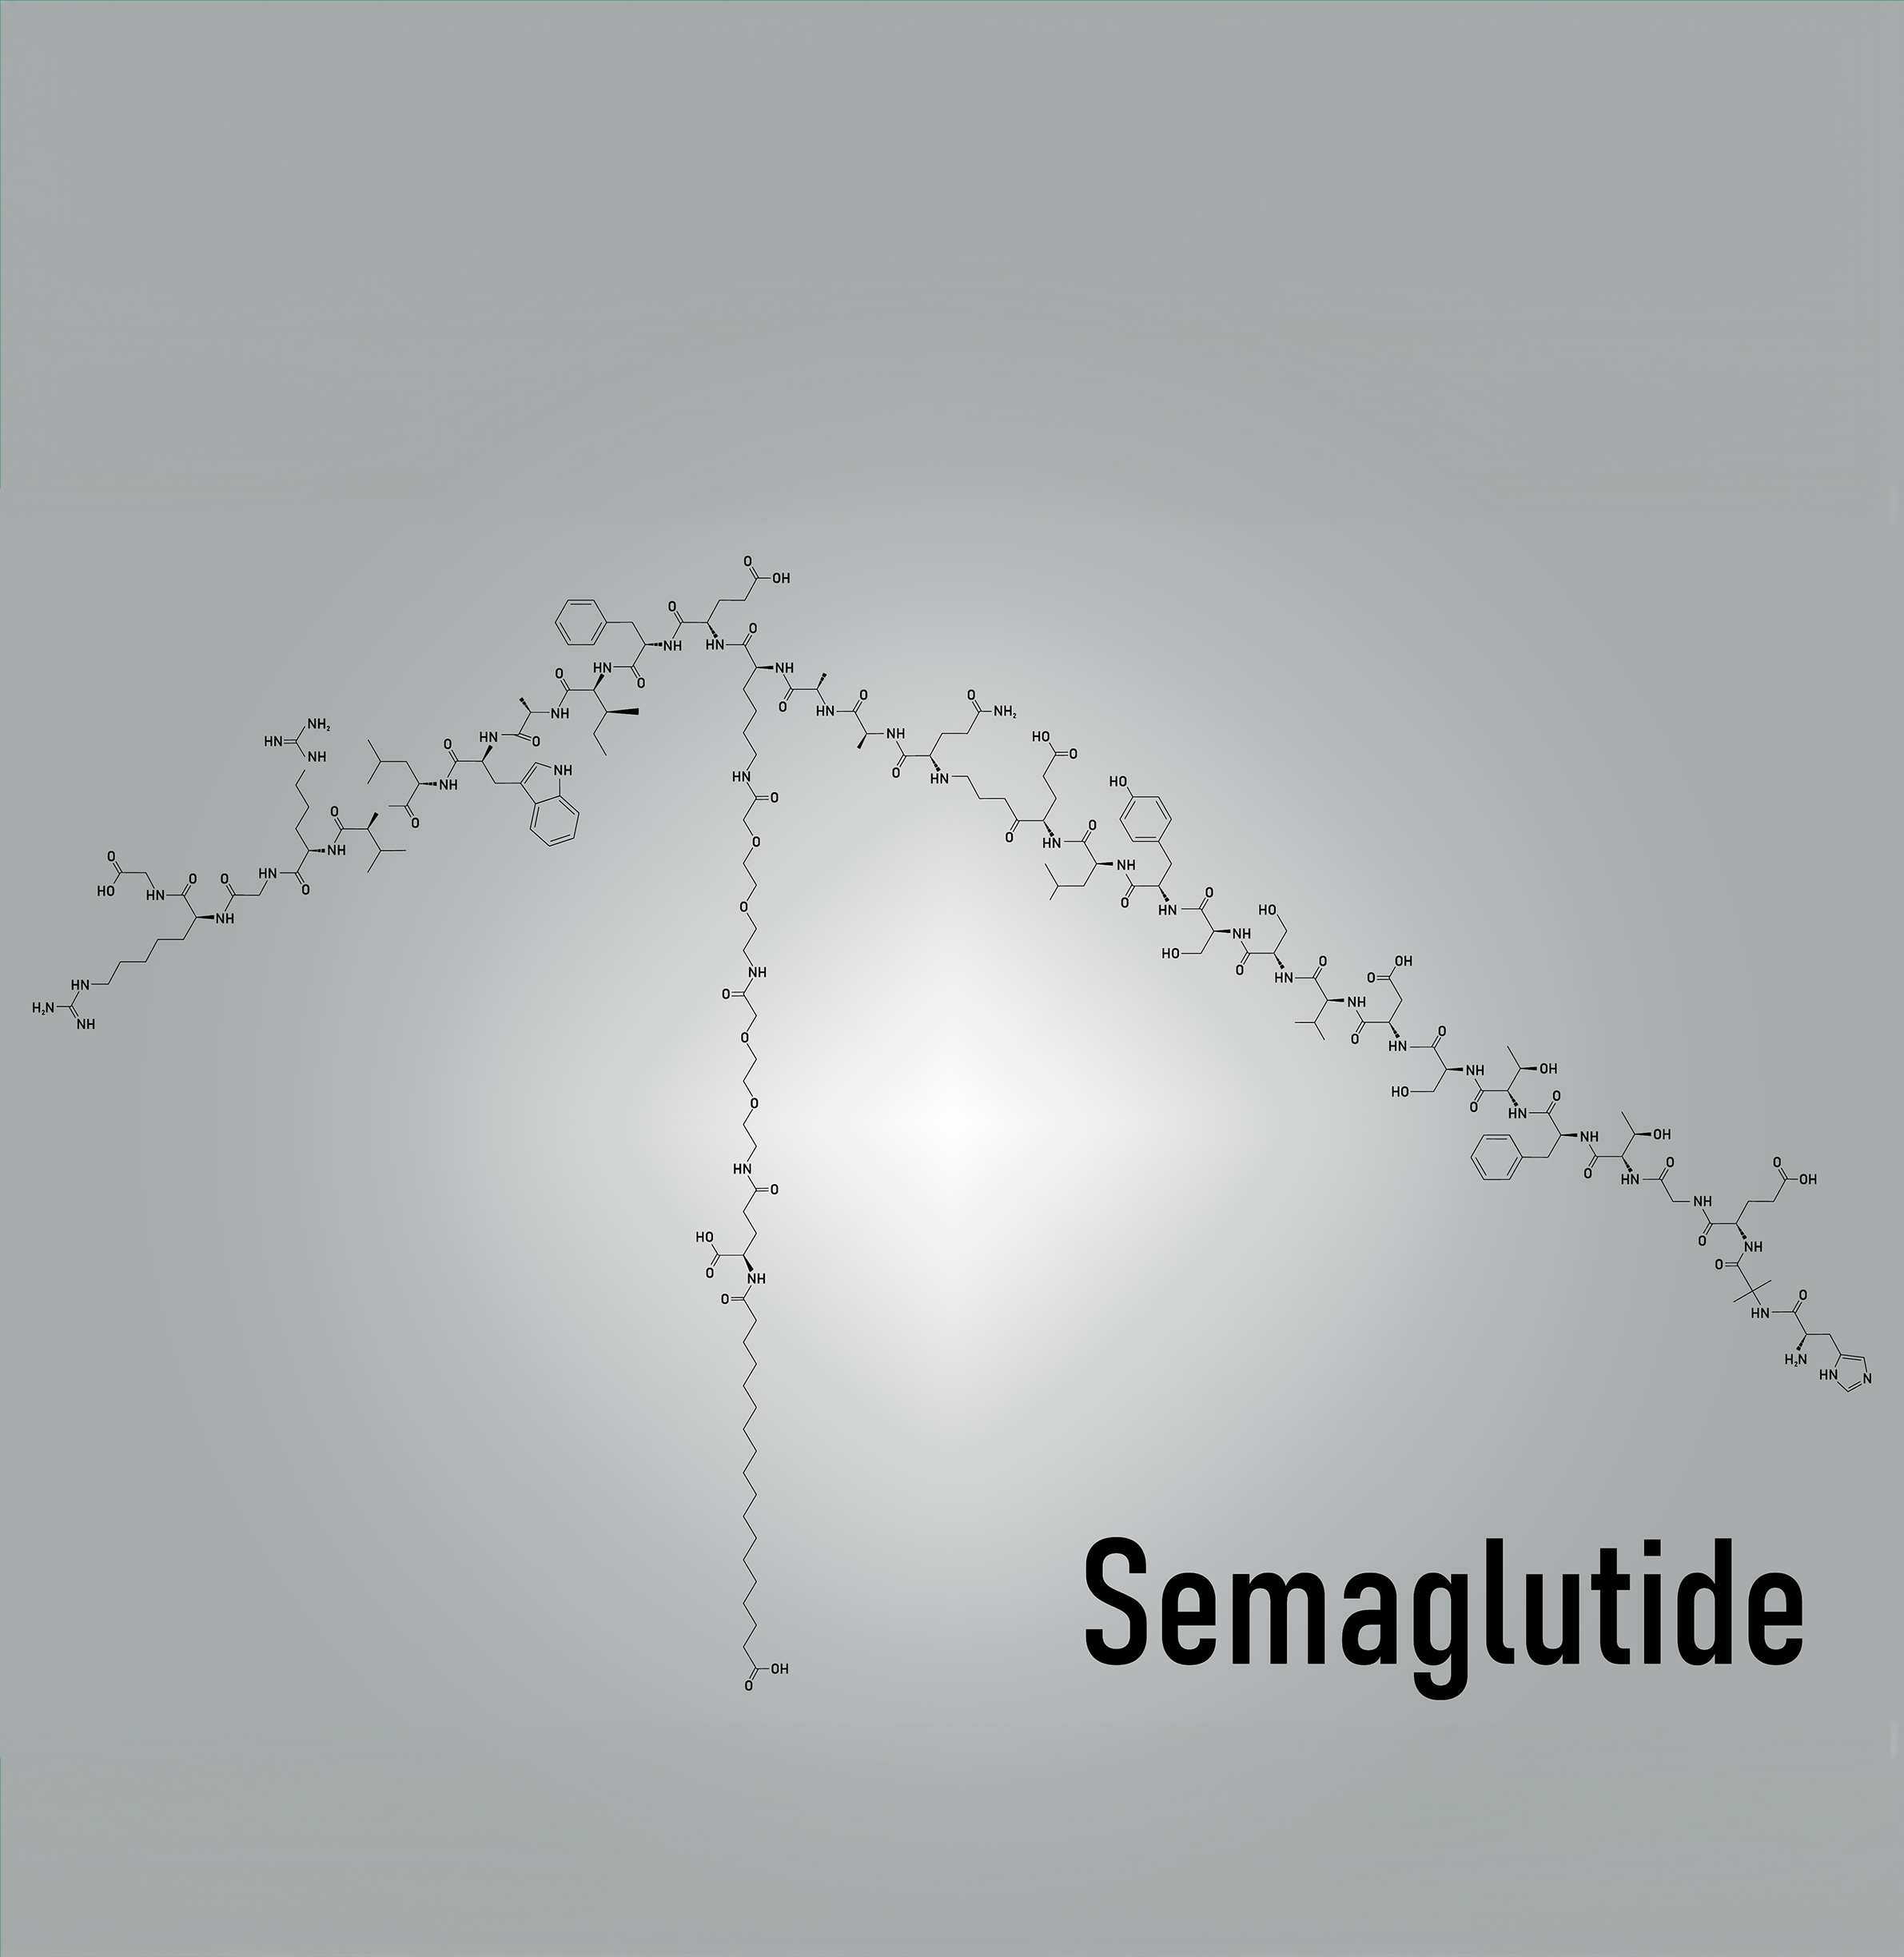 Semaglutide, one of the active ingredients with exceptional potential